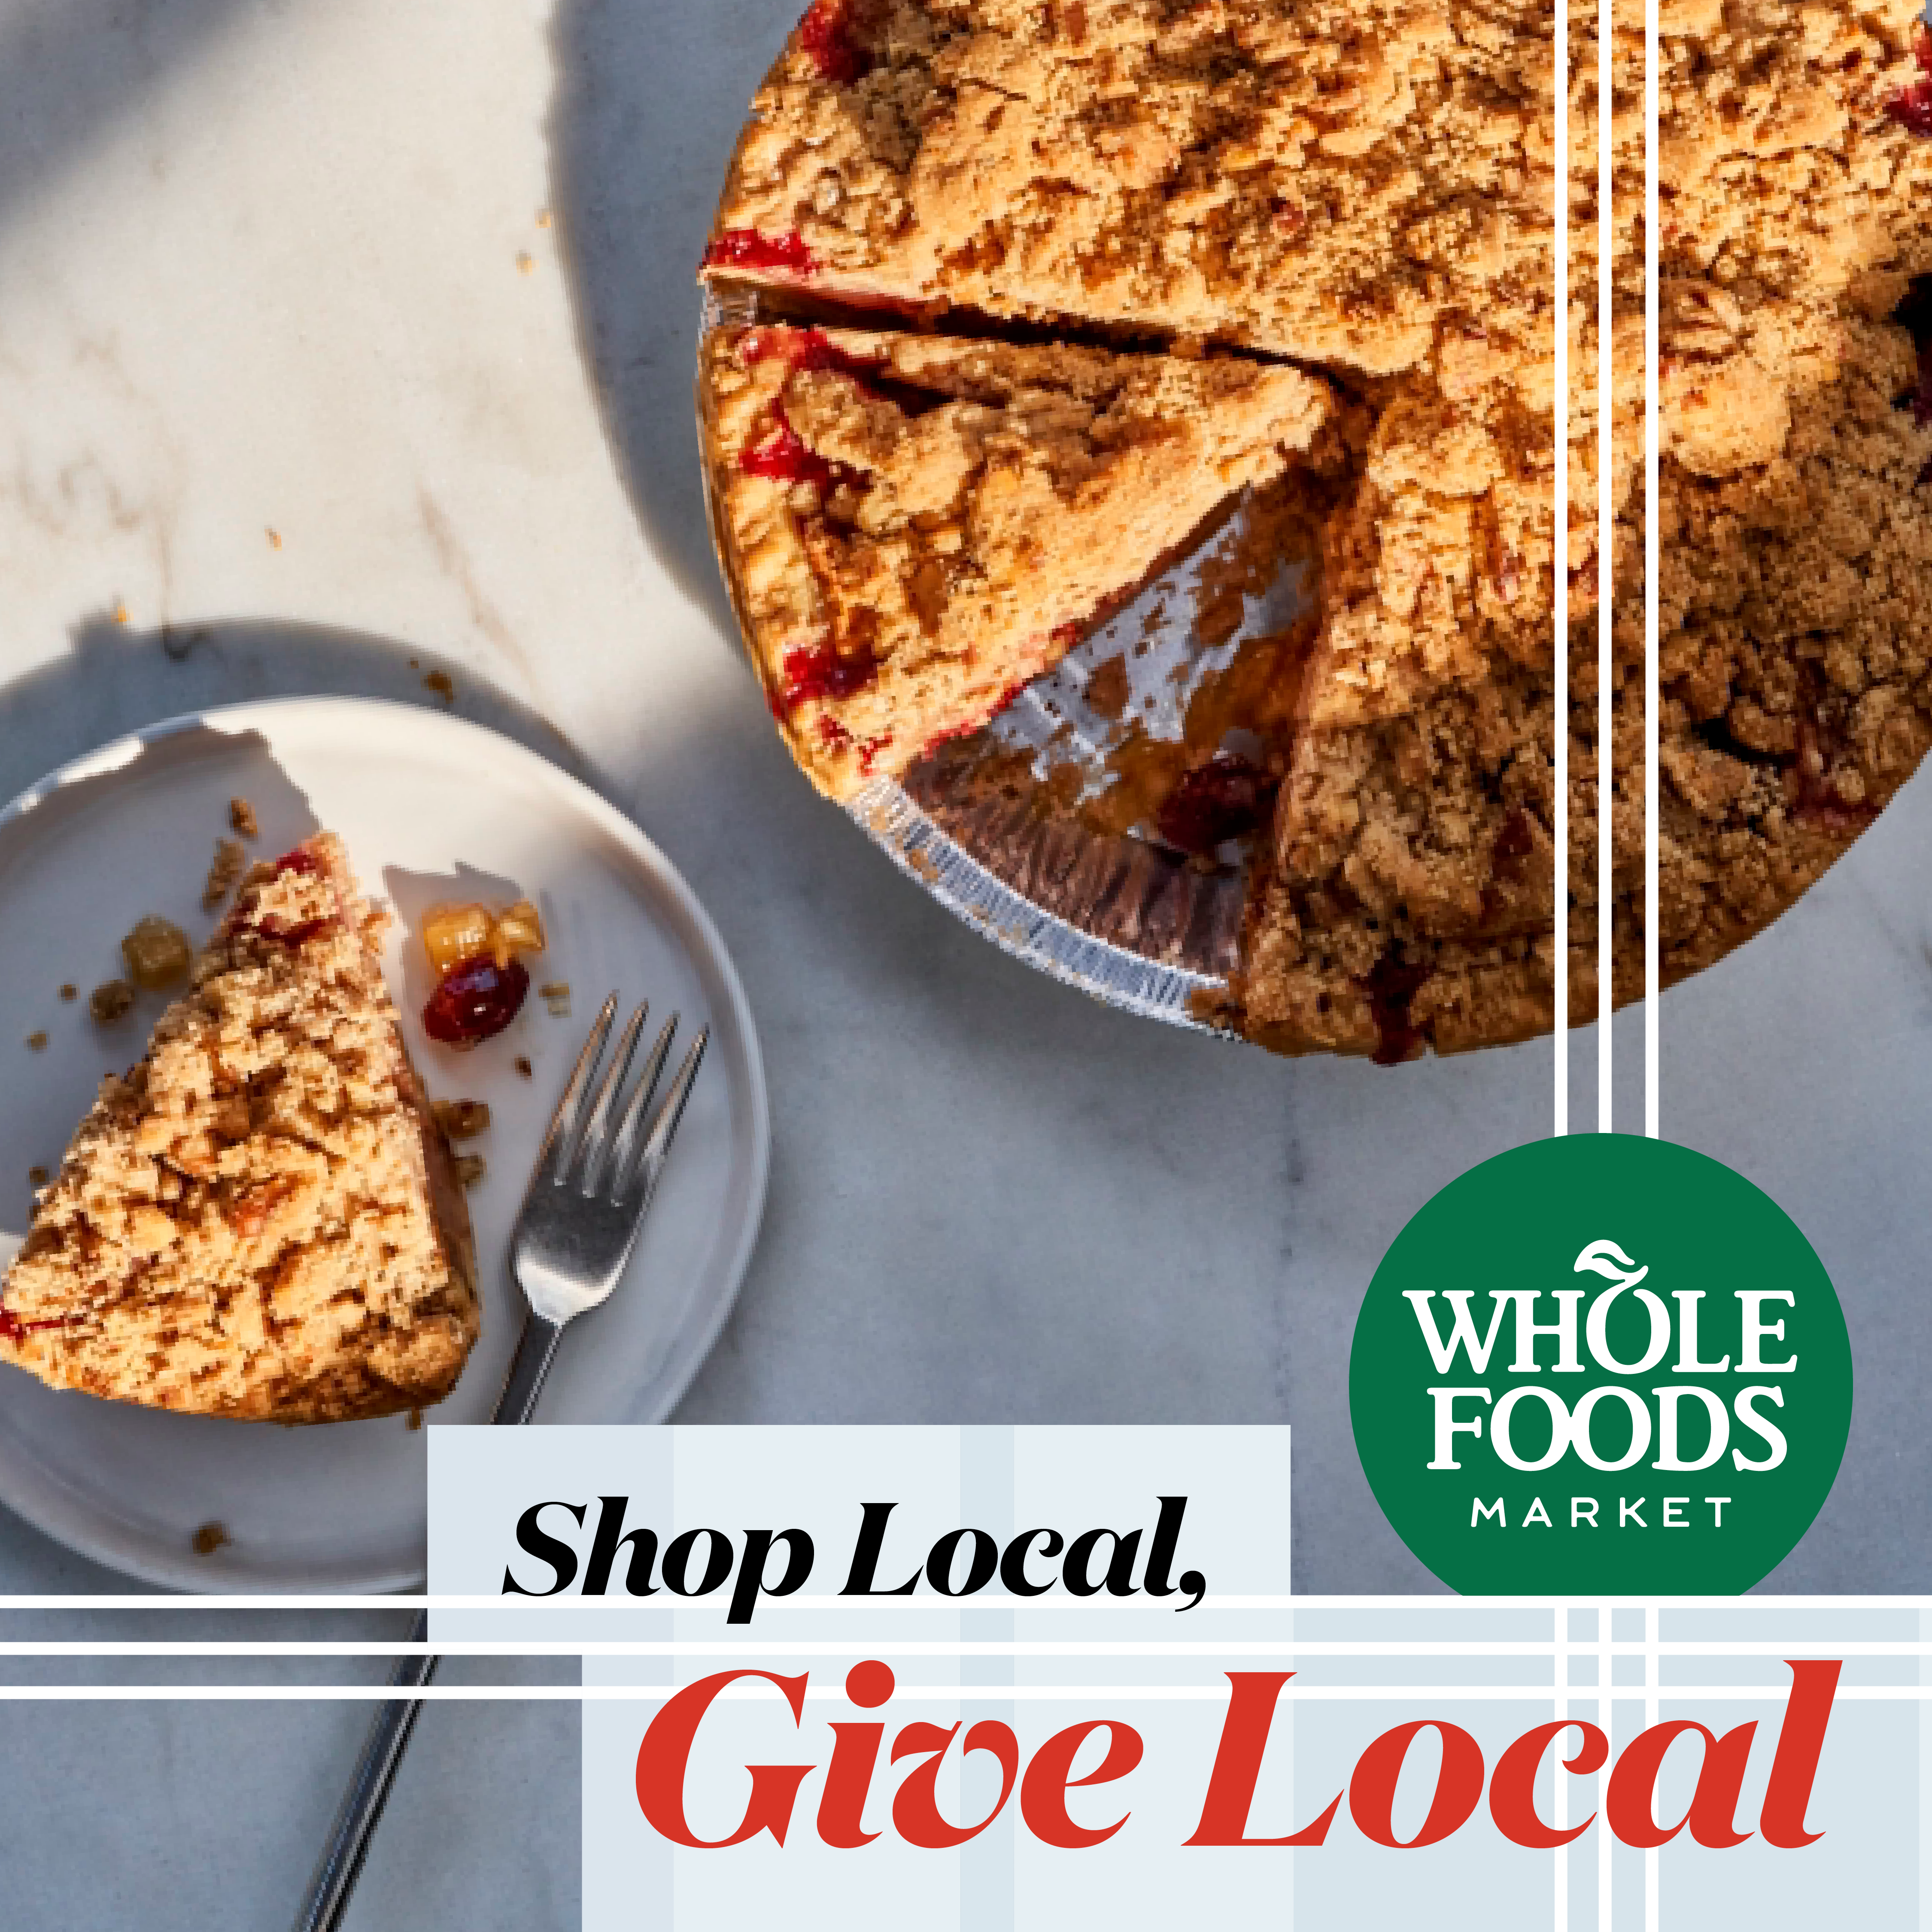 Whole Foods Market: Shop Local, Give Local